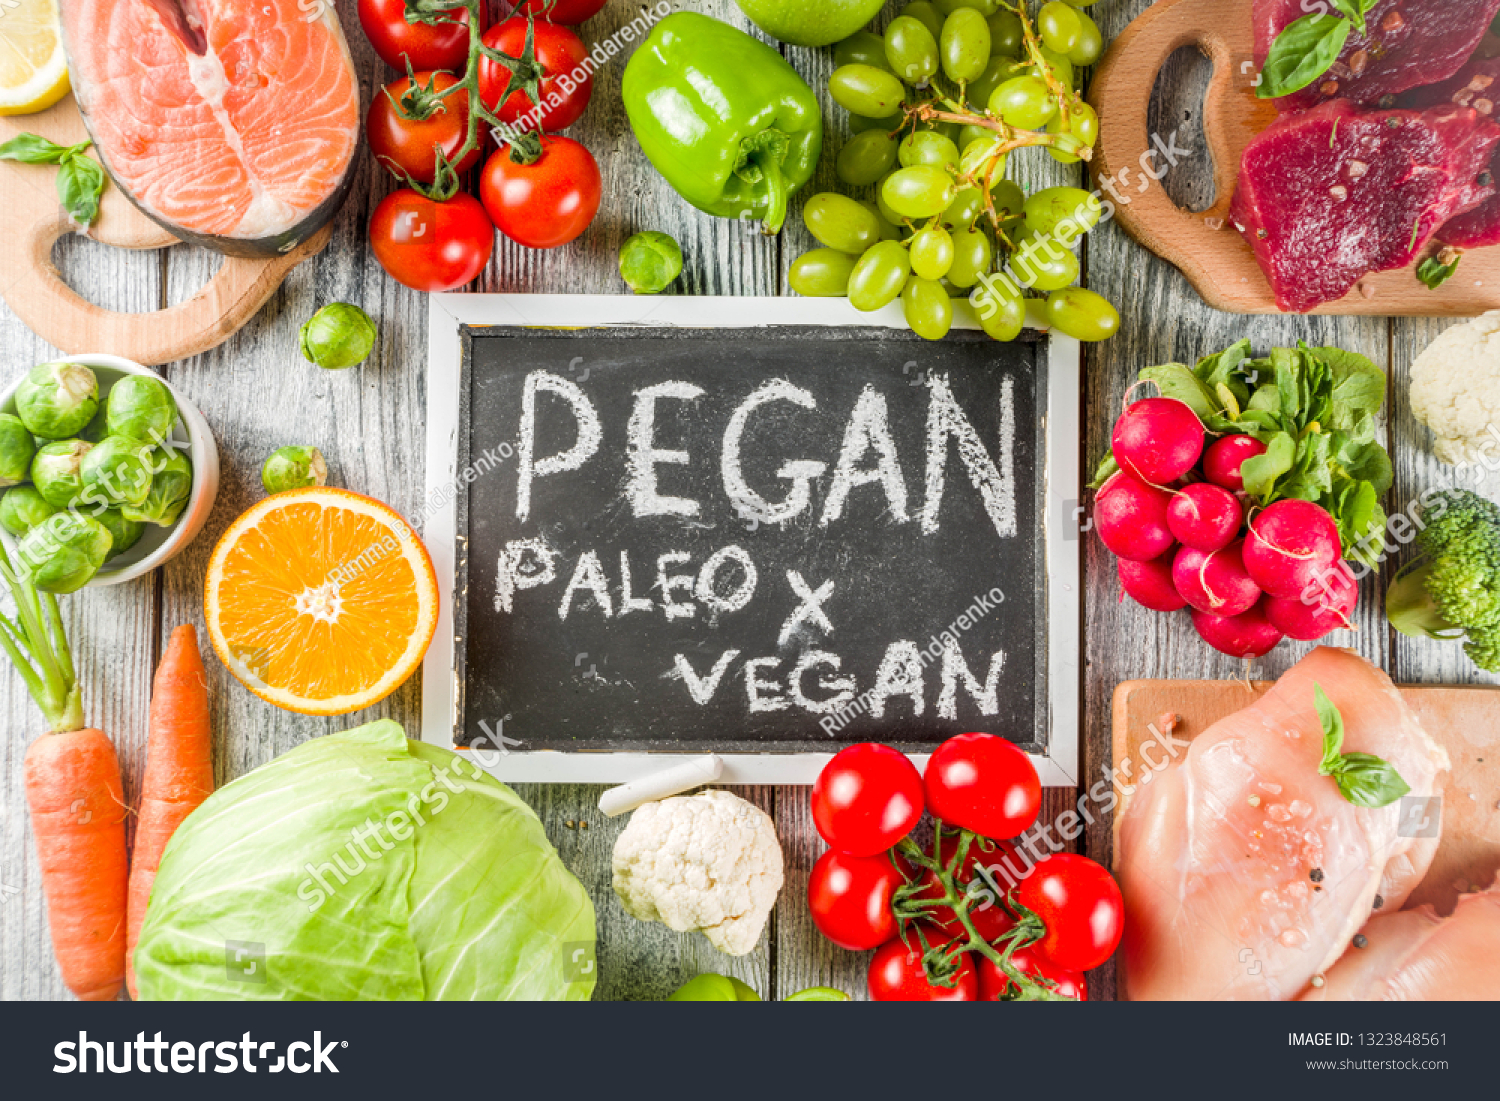 Trendy pegan diet - vegan plus paleo diet food concept, many fresh vegetables, fruits, raw beef and chicken meat, salmon fish, white wooden background top view copy space #1323848561